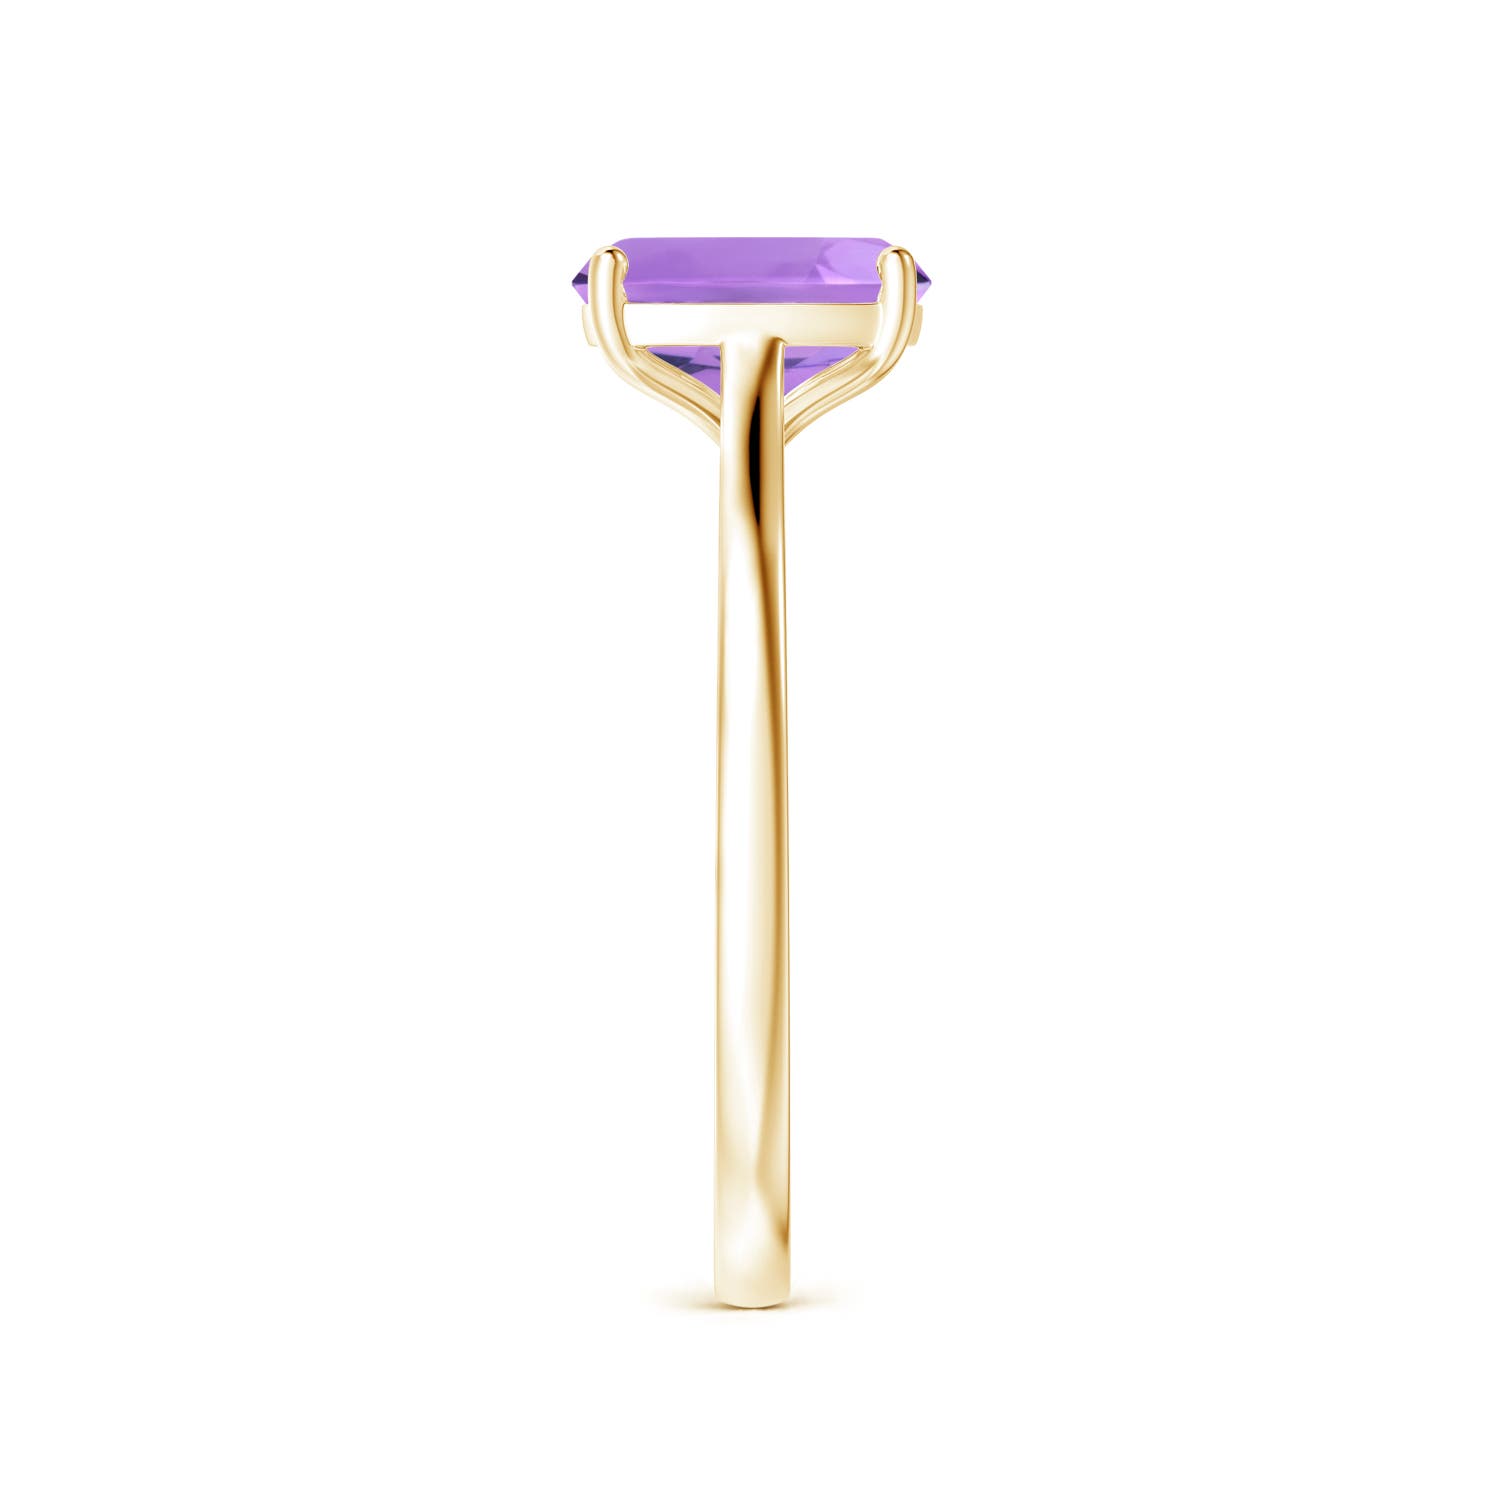 A - Amethyst / 1.2 CT / 14 KT Yellow Gold